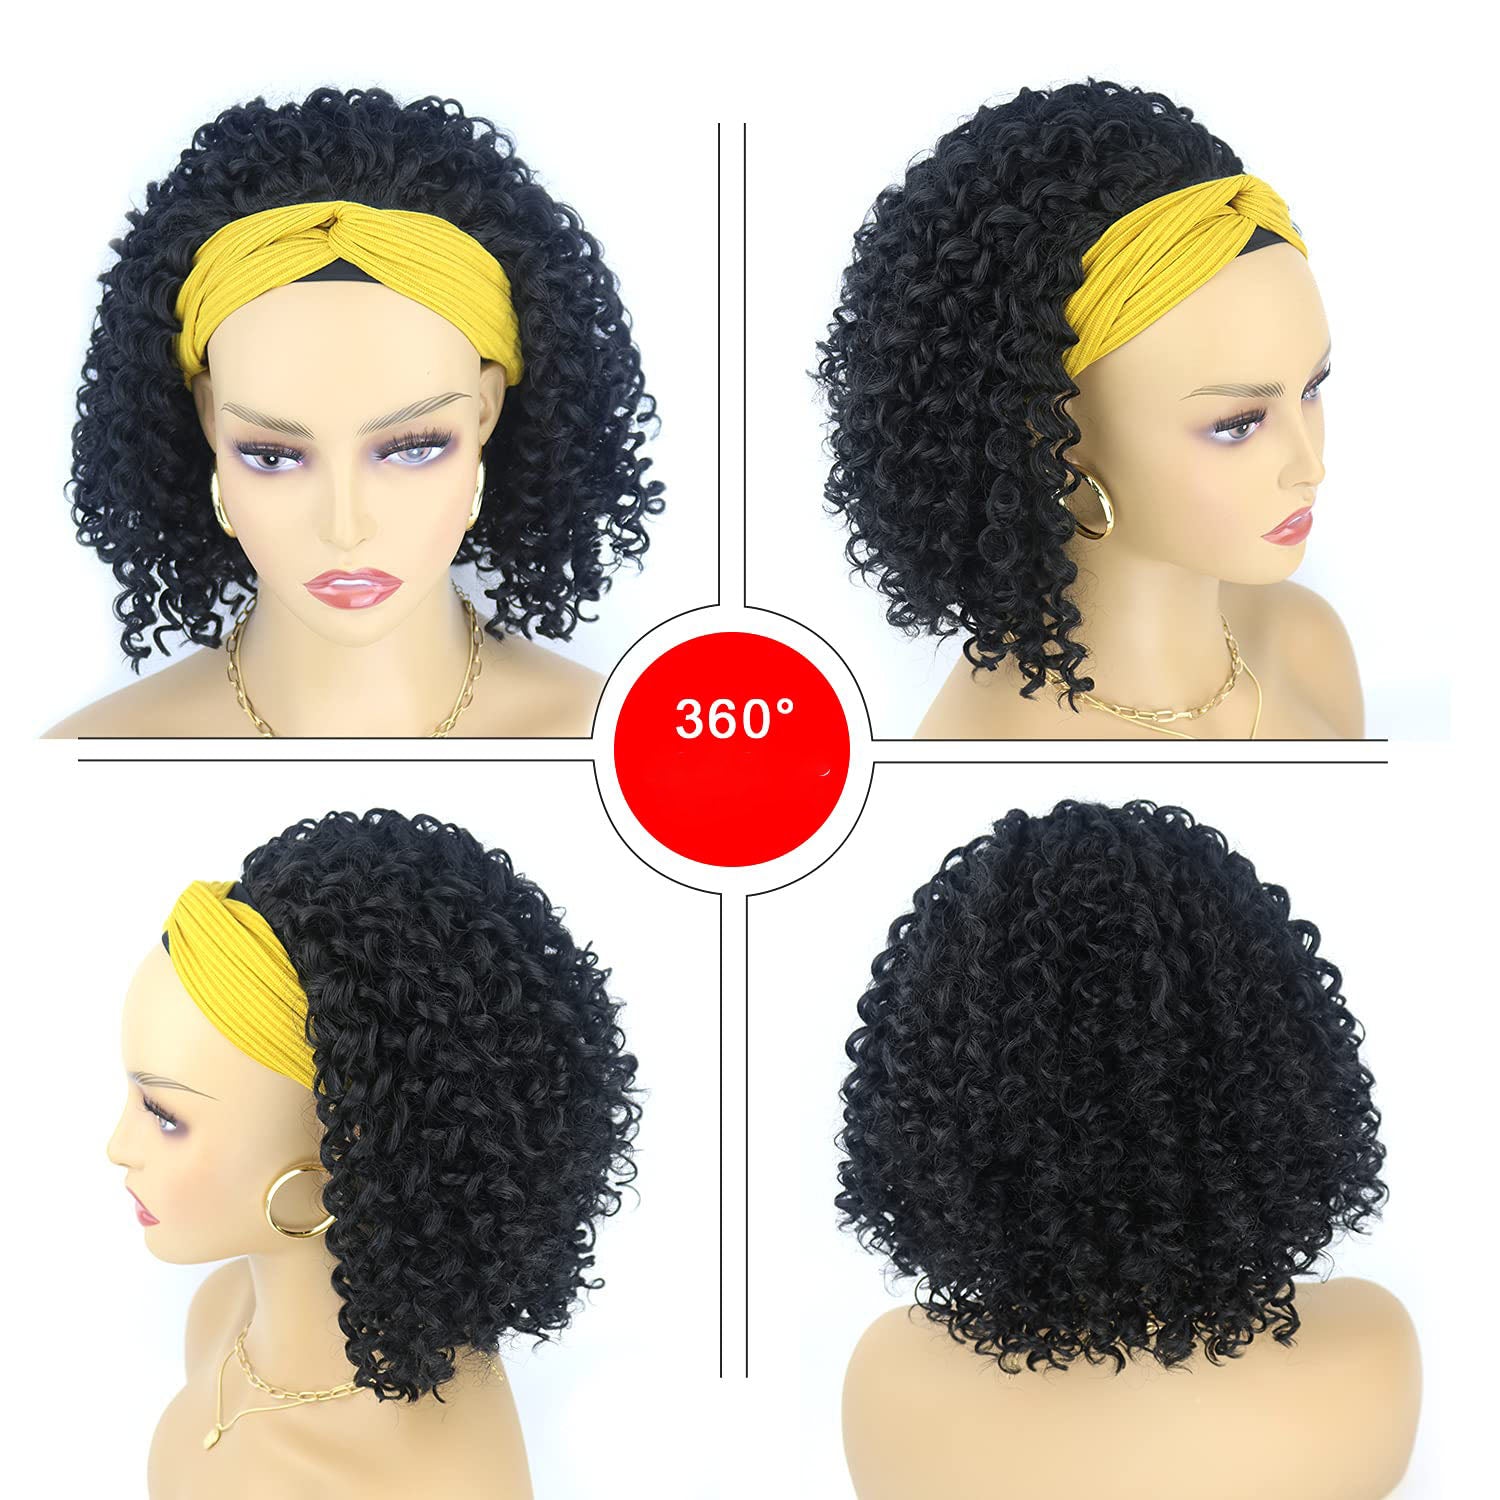 Short Curly Bob Headband Wig for Women Natural Black Deep Wave Headband Curly Wig 10inch Synthetic Pixie Wig Glueless None Lace